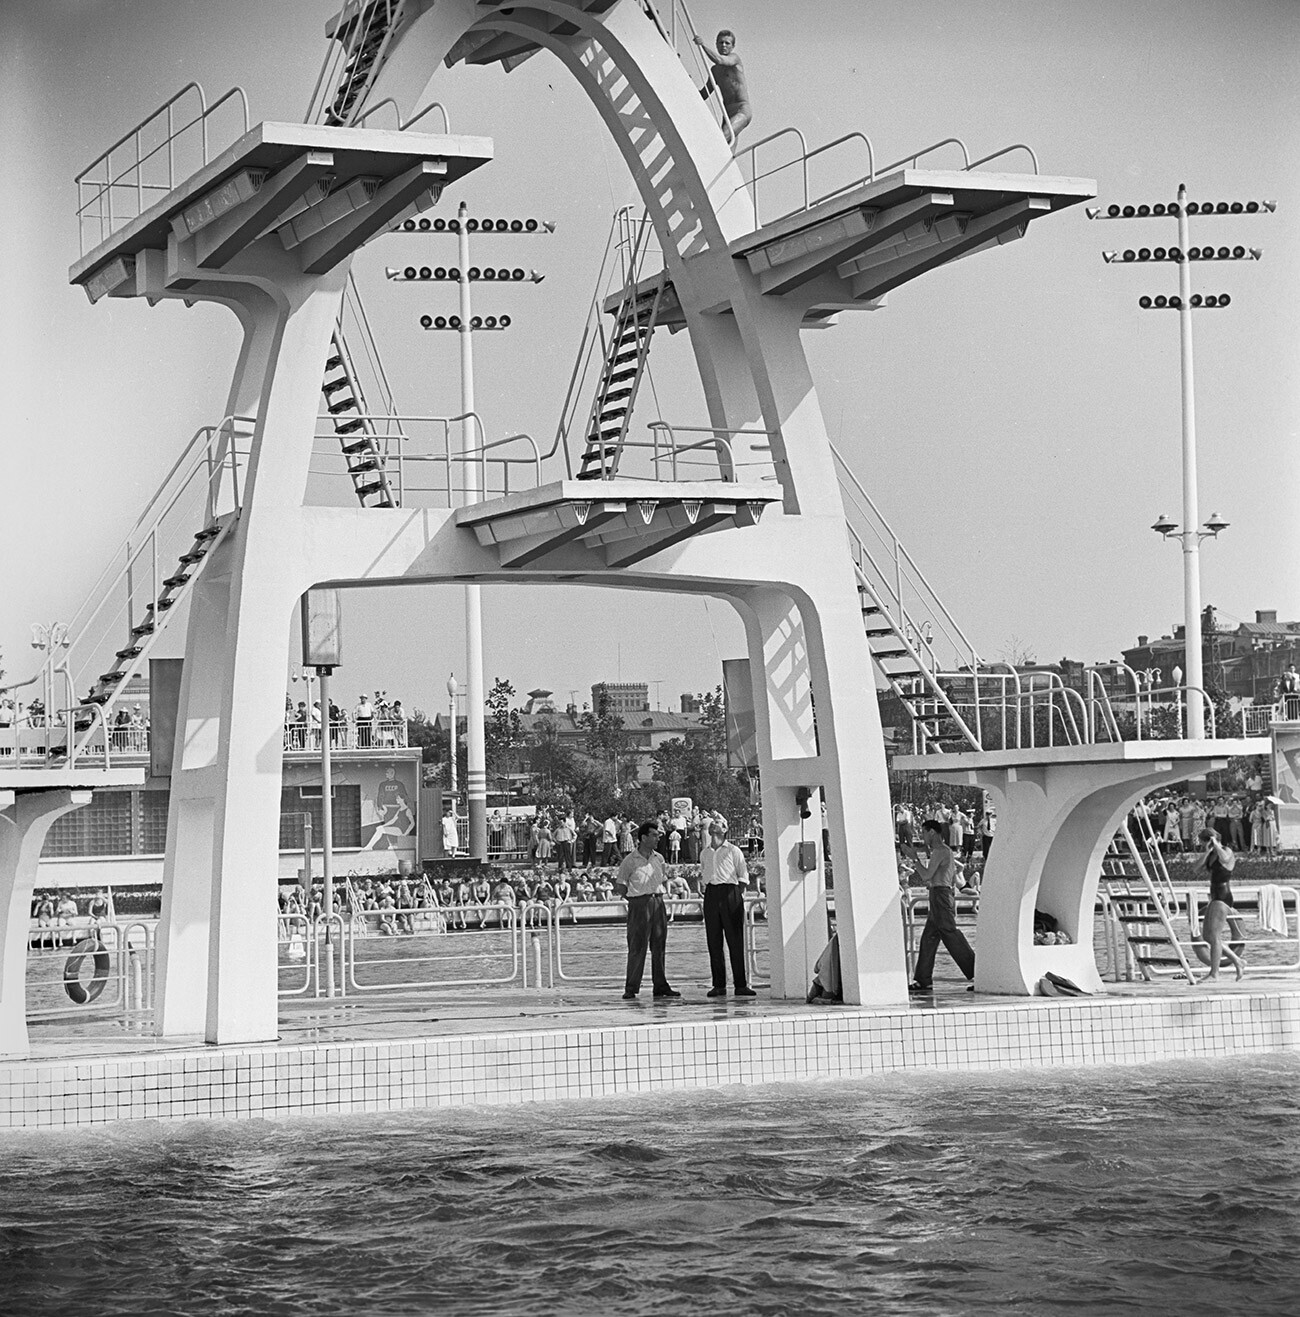 A 10-meter diving tower at the Moskva swimming pool.